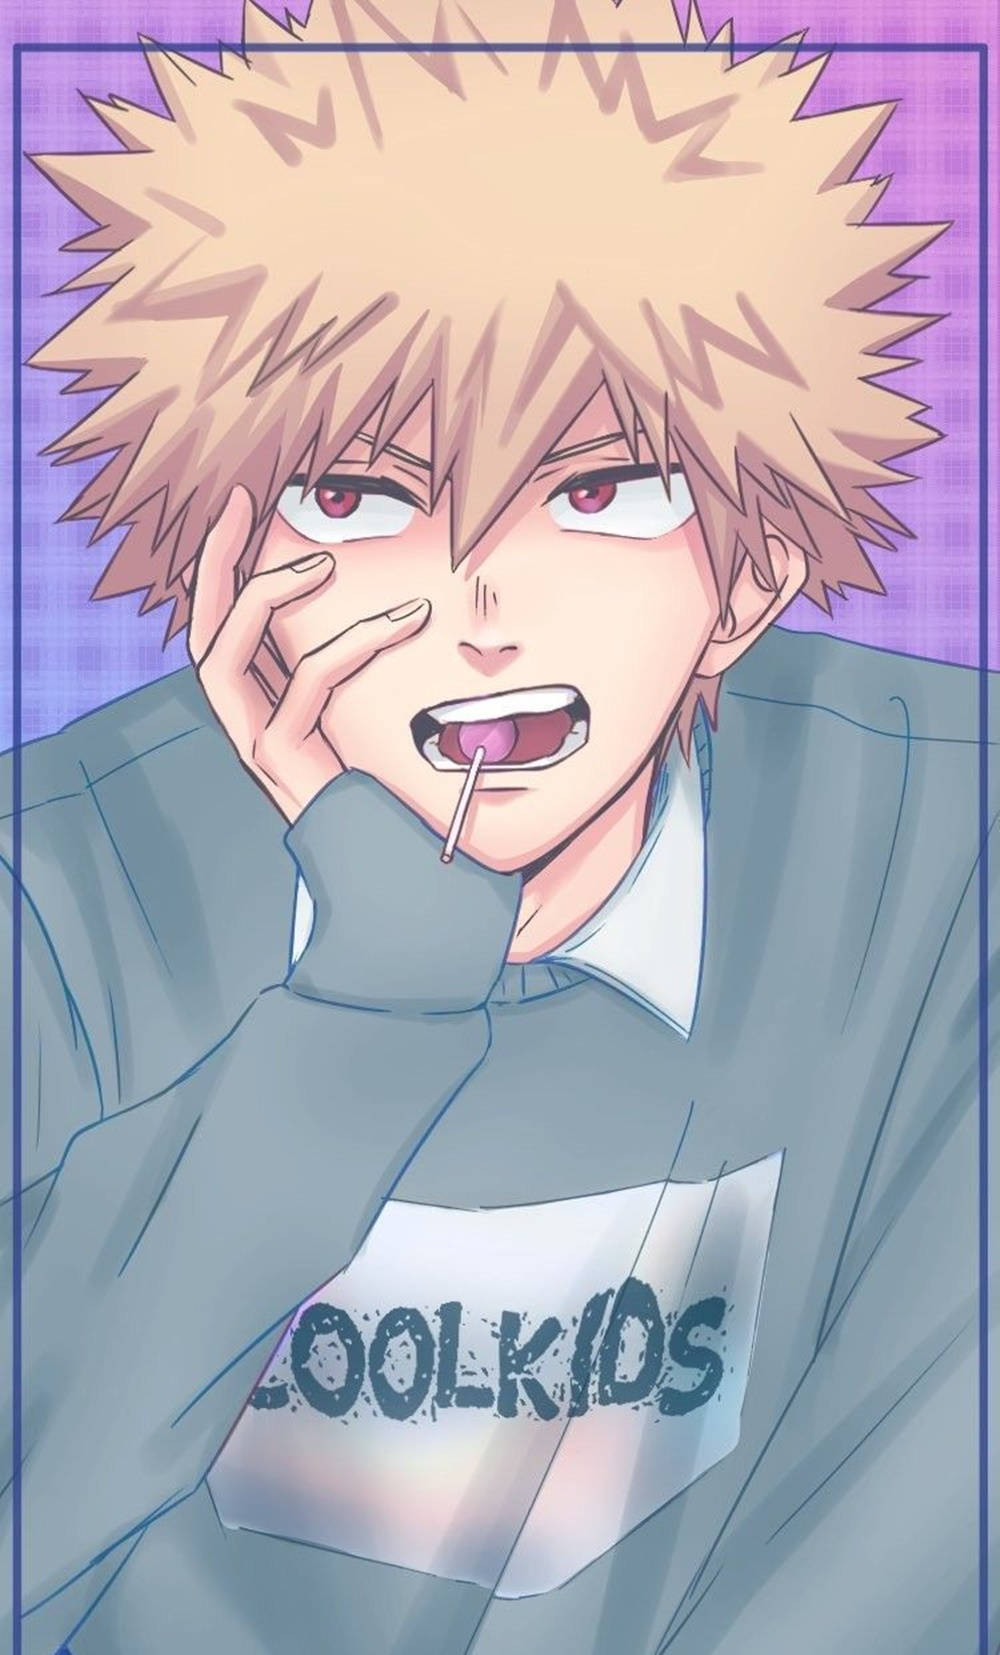 Cute Bakugou Looking On With A Determined Expression Wallpaper